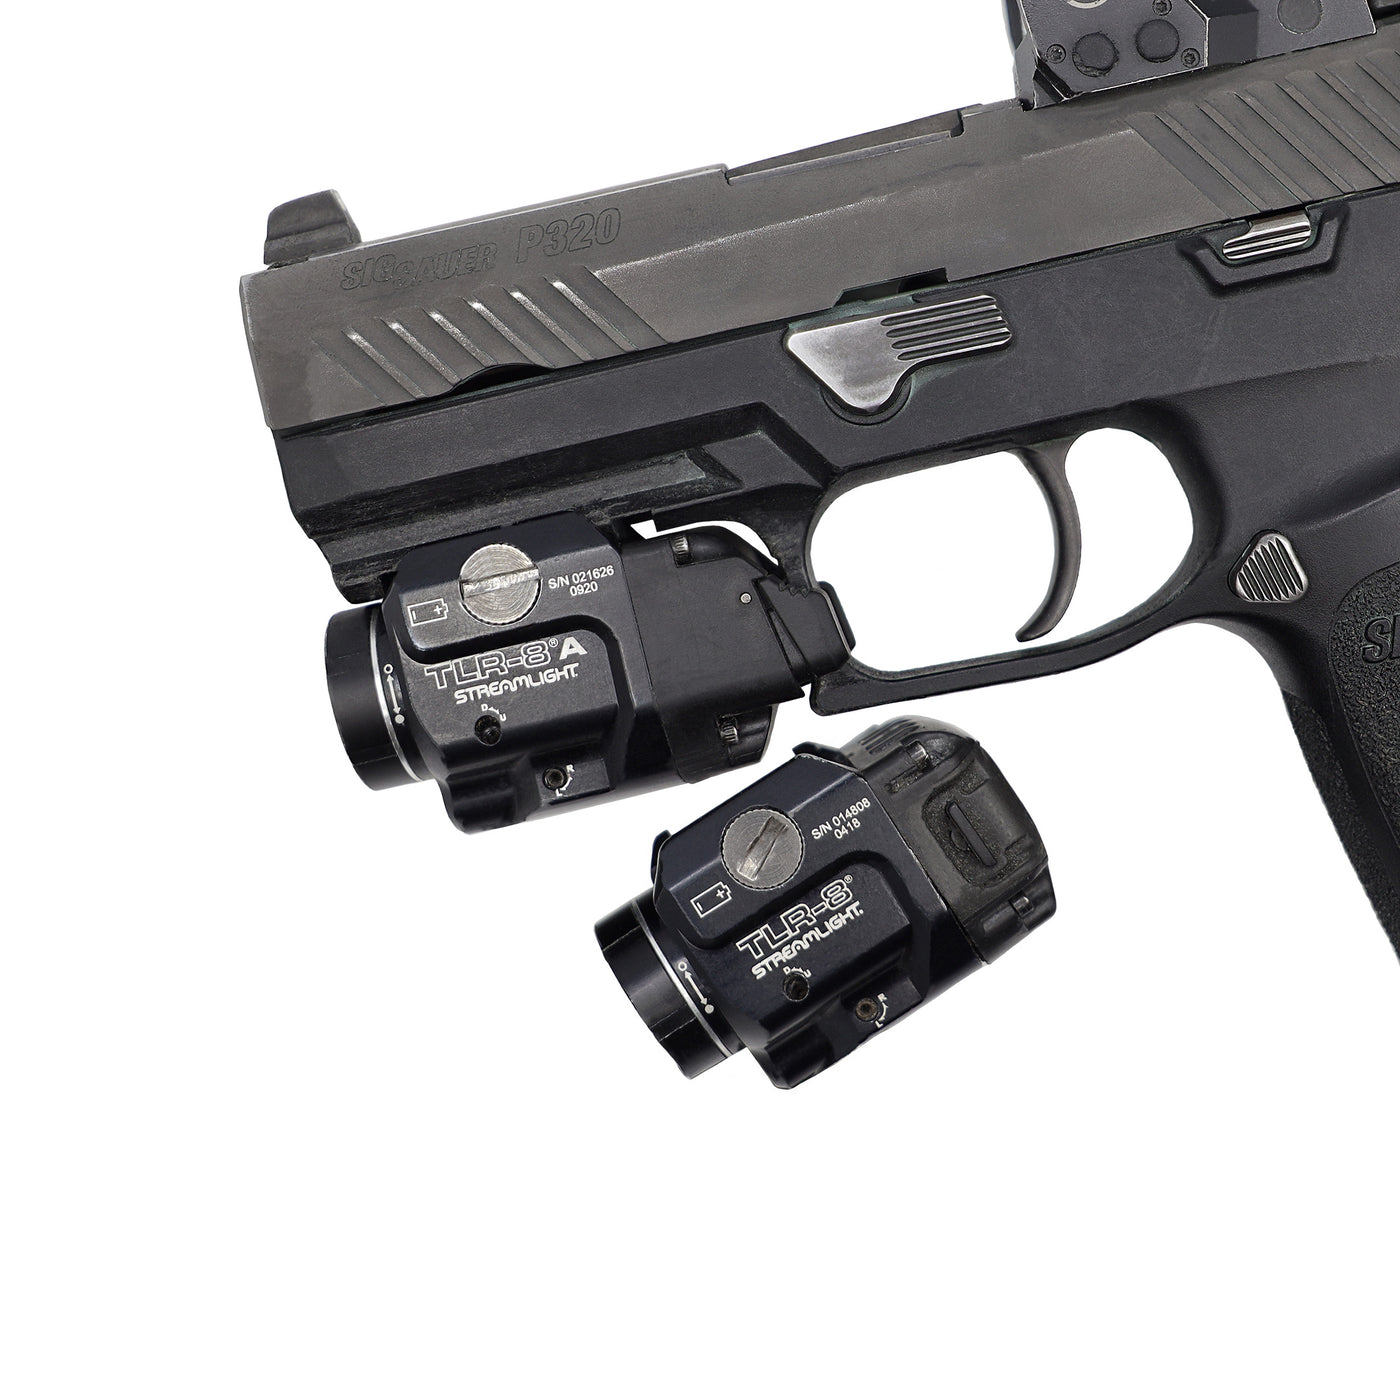 SIG P320 firearm with streamlight TLR8 weapon light